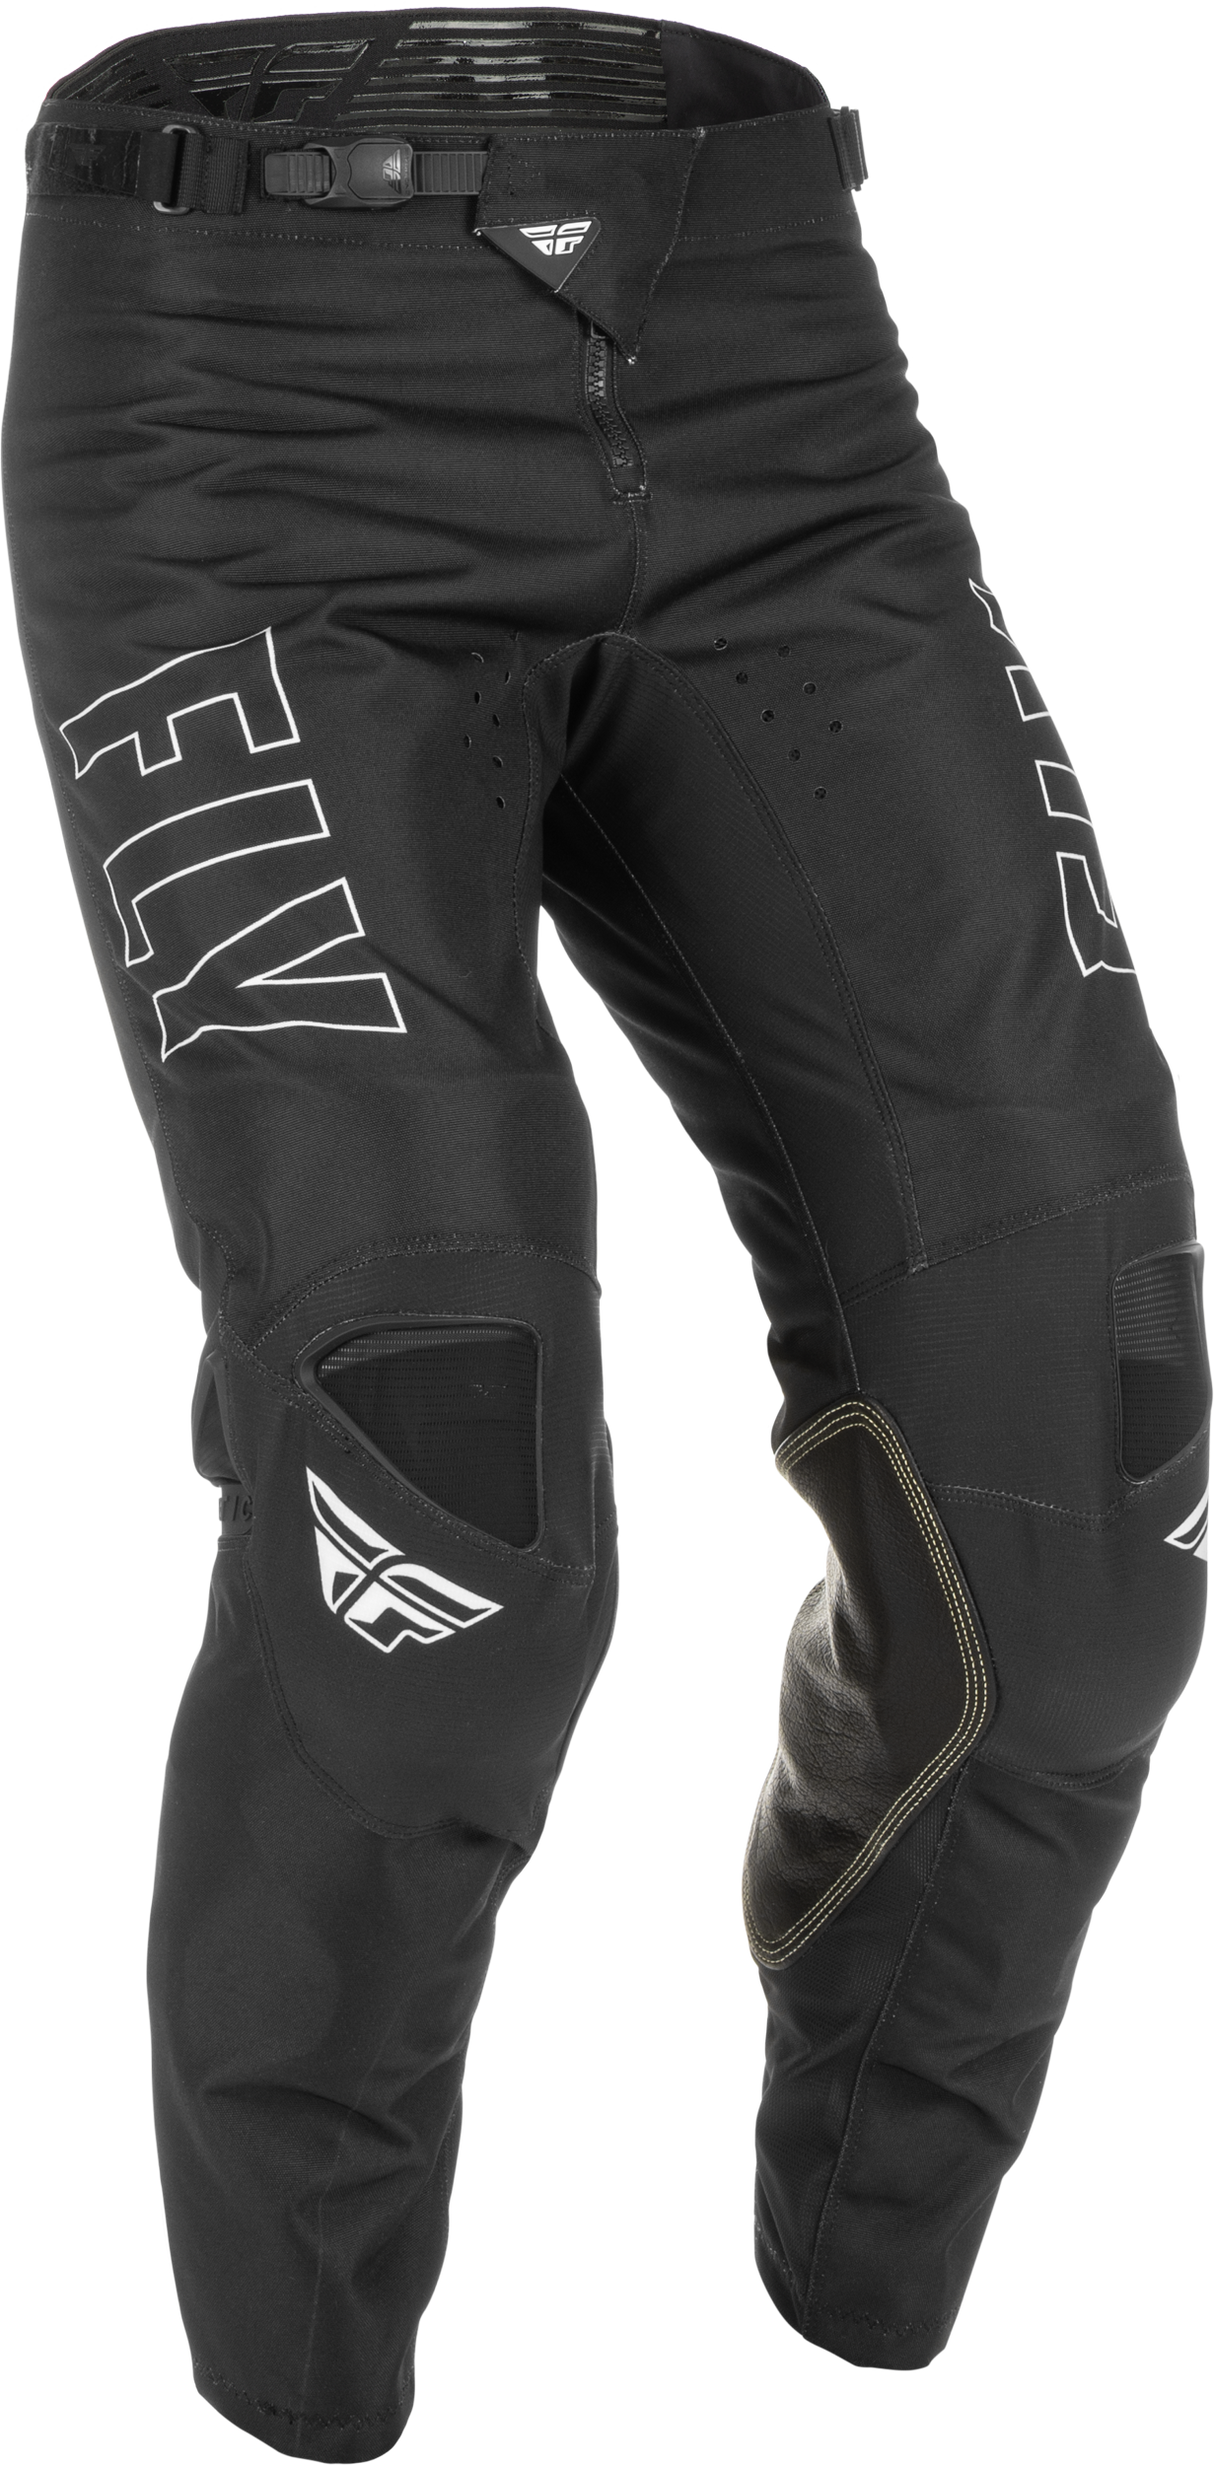 FLY Racing Kinetic Pant 2022 Fuel Blk Wht